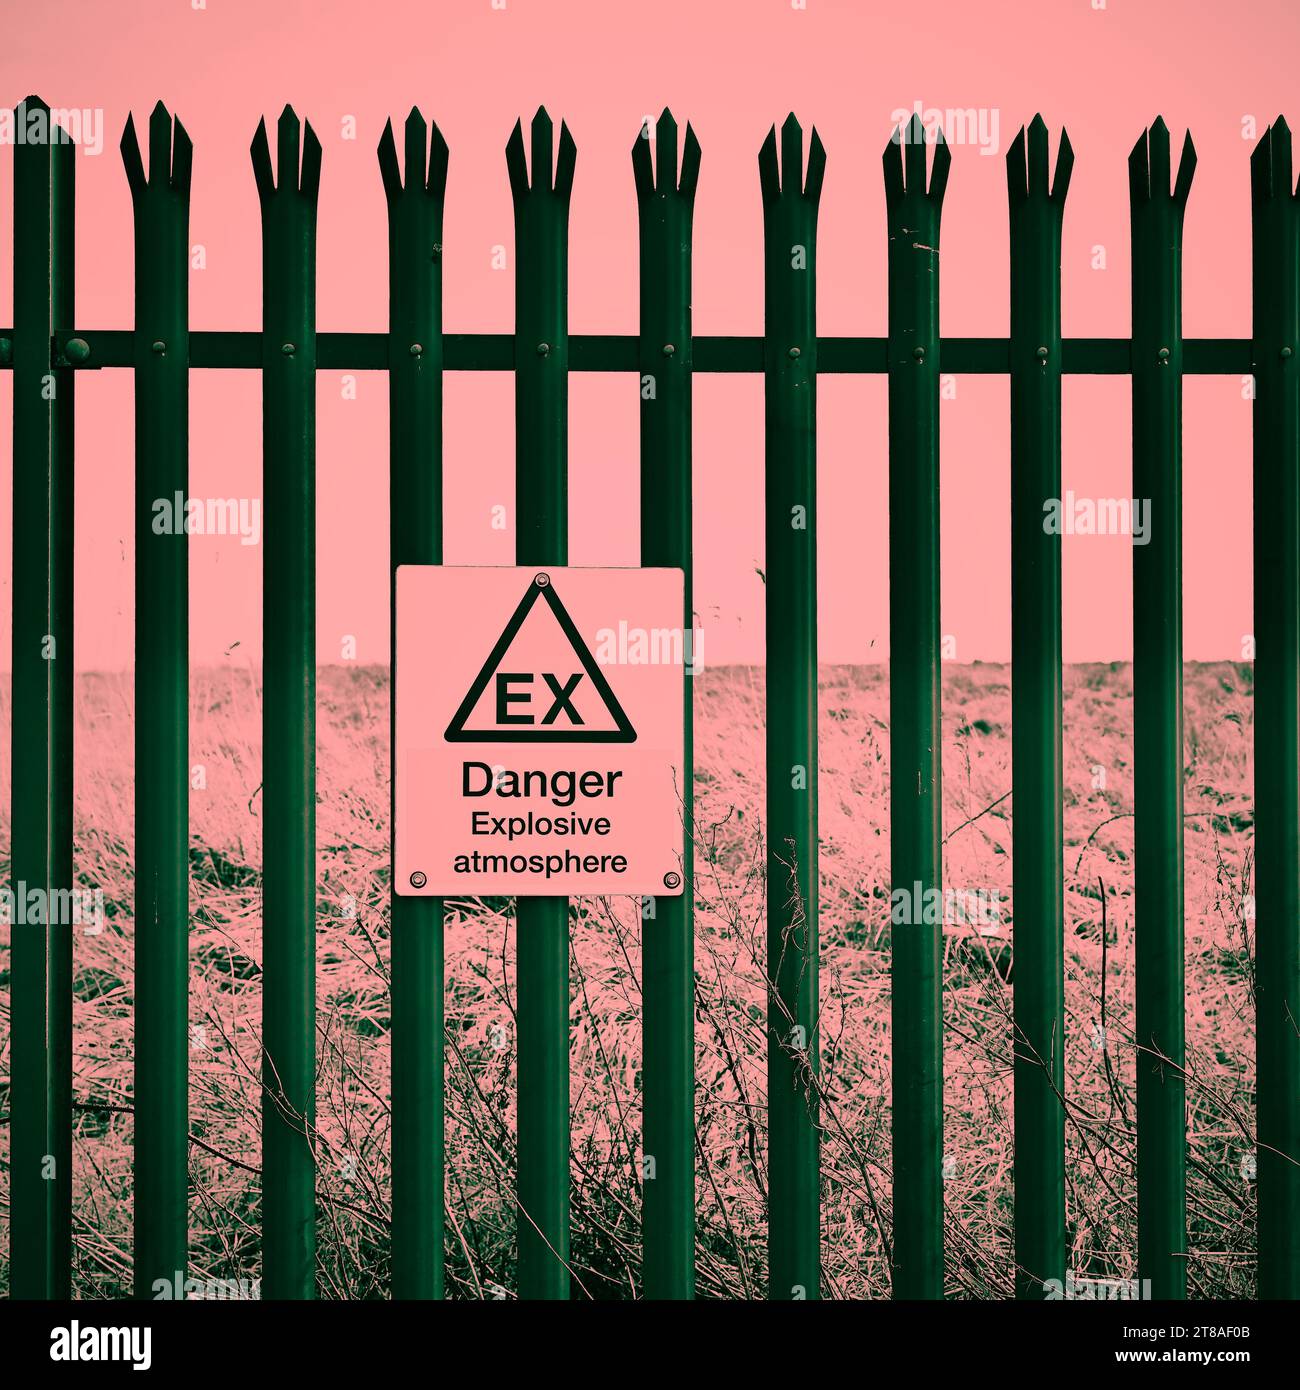 Danger expolosive atmosphere  sign on fence at old landfil site Stock Photo